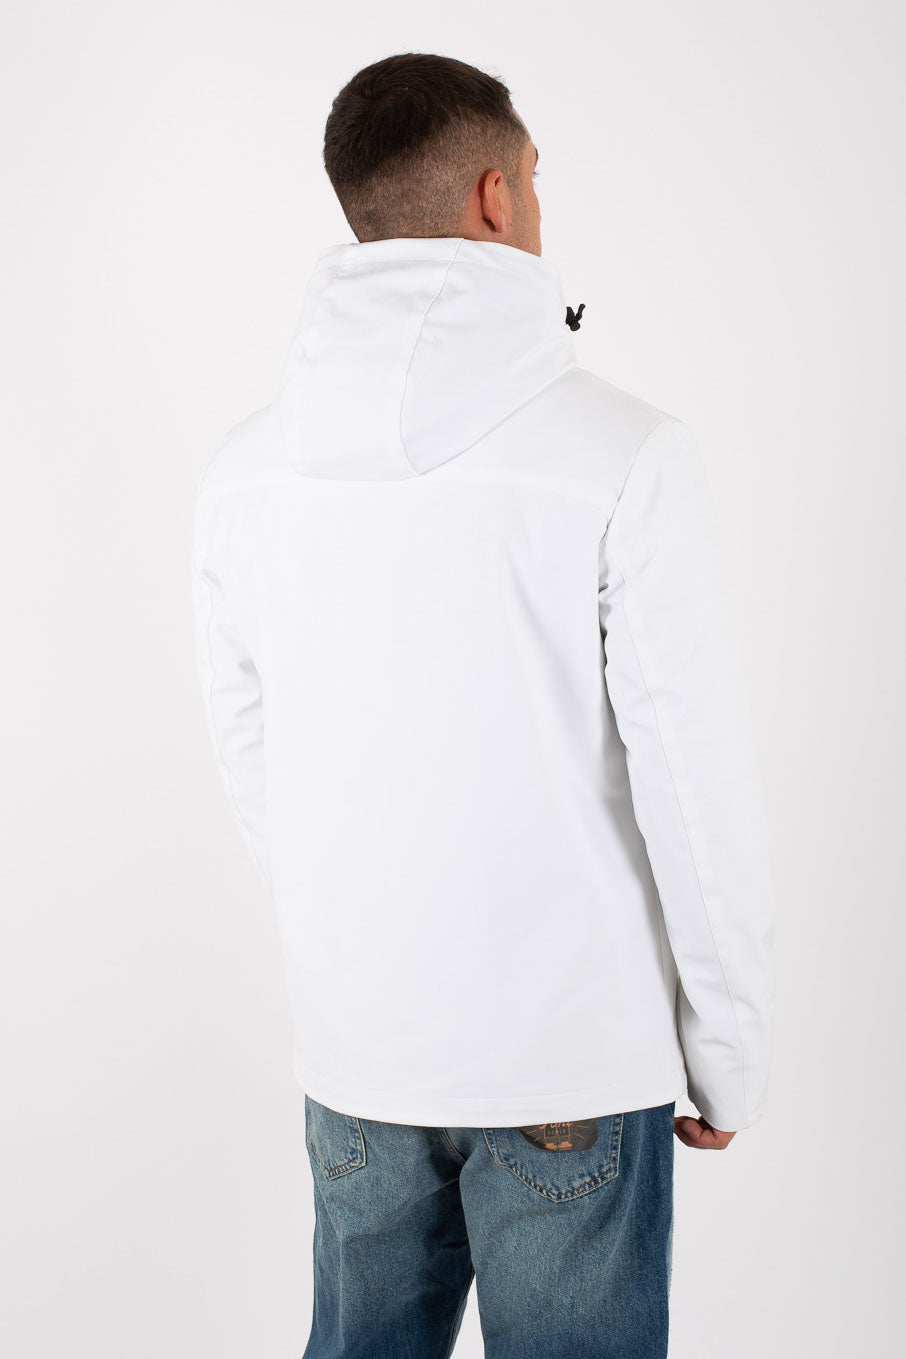 Woolrich Pacific Soft Shell Bianco Uomo - 5